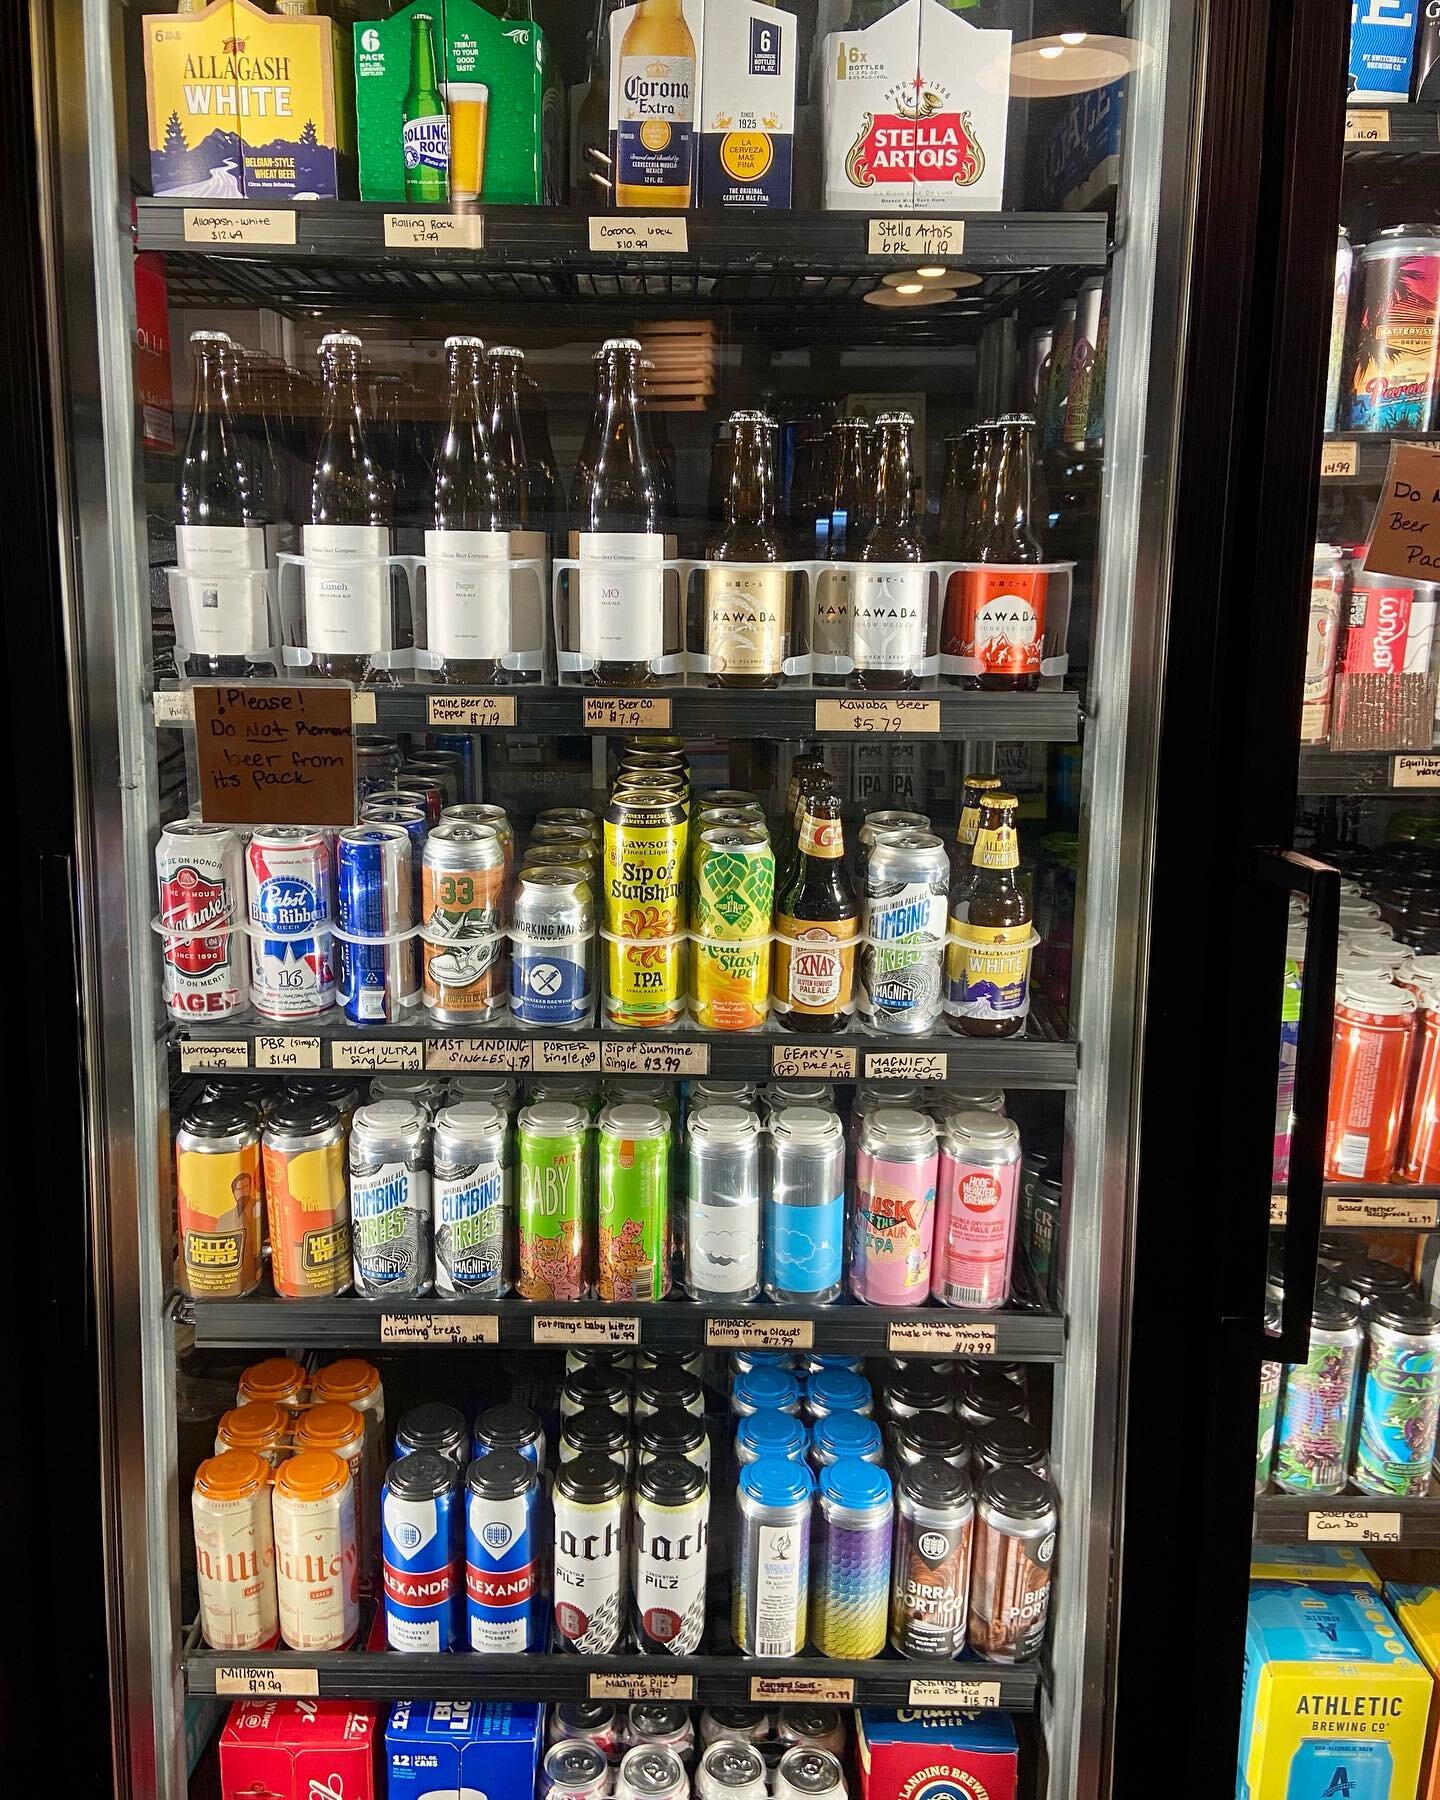 We&rsquo;re stocked and ready for your beer o&rsquo;clock and beer thirty with local craft beers from breweries Belleflower in Portland, Mast Landing in Westbrook, Orono in Orono, Oxbow in Newcastle, Maine Beer Co in Freeport, Bissell in Portland, Ba